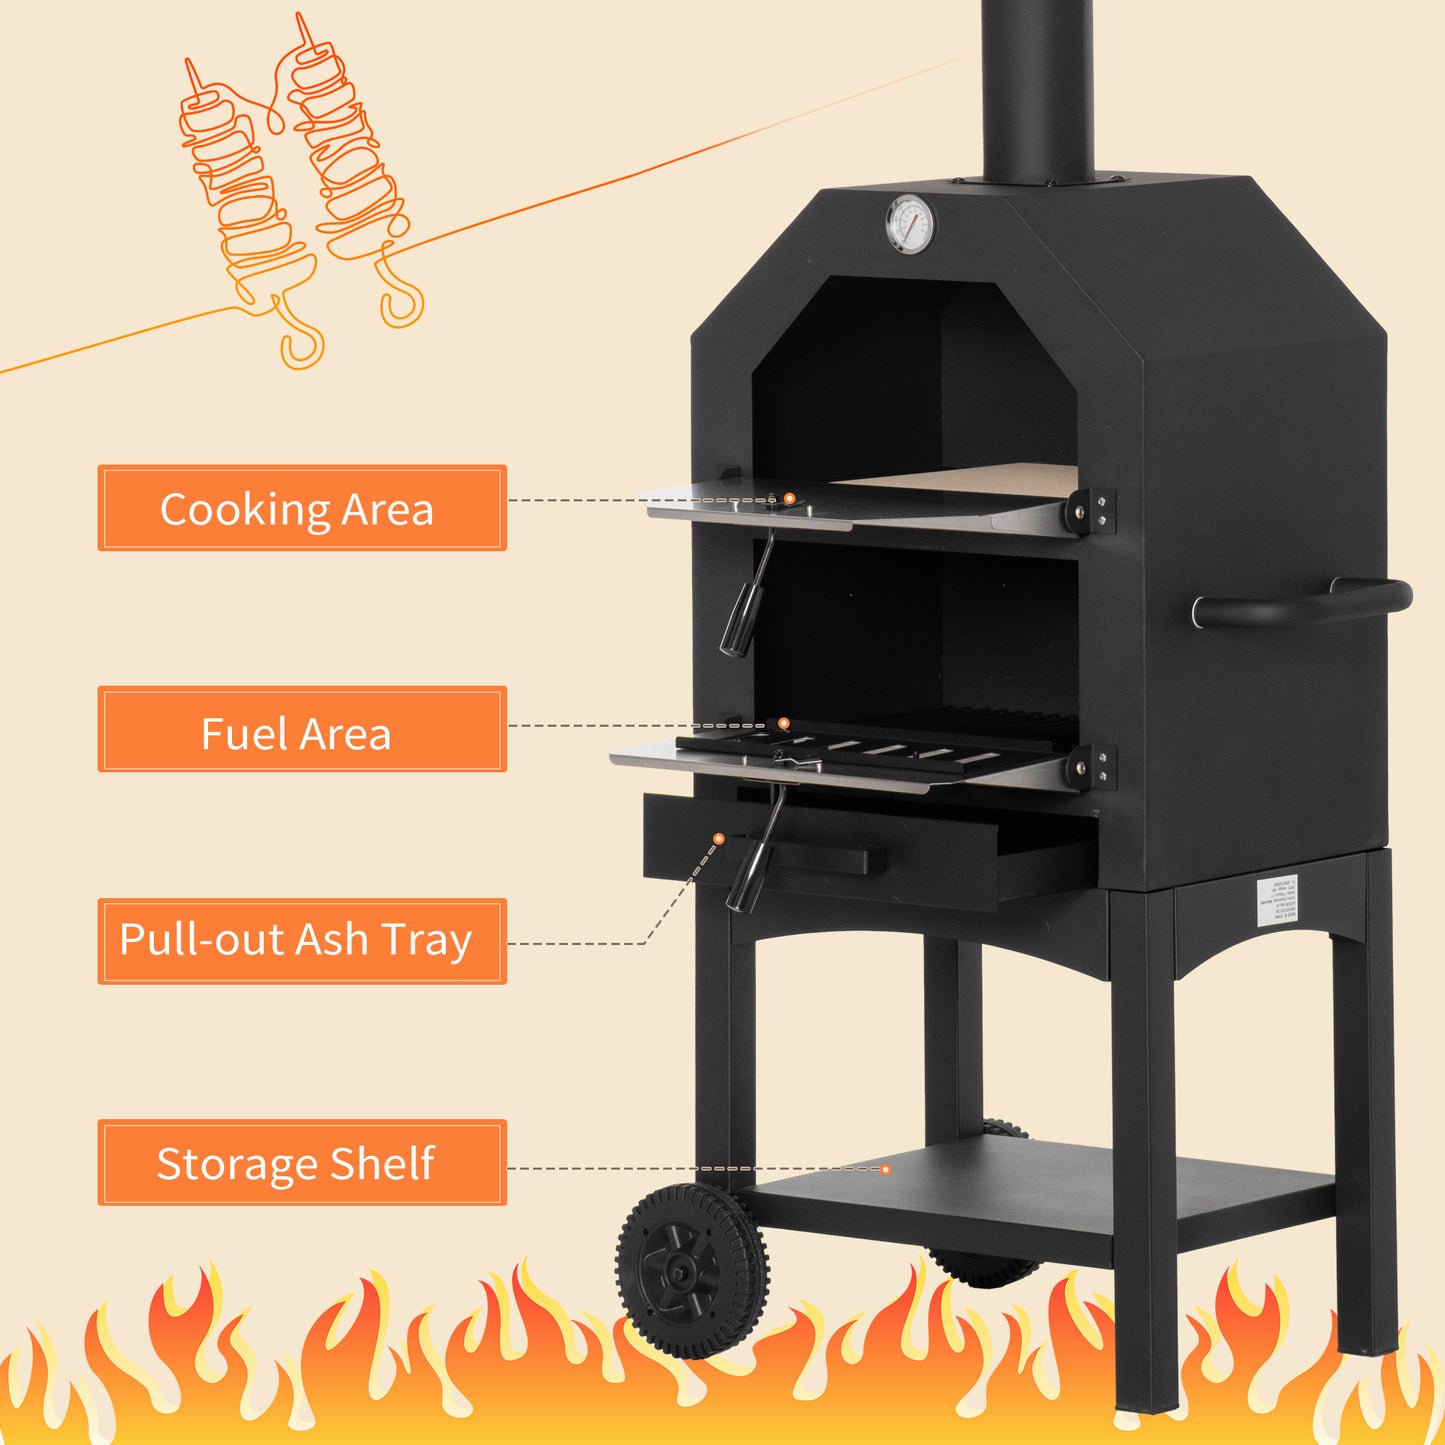 Outsunny Outdoor Garden Pizza Oven Charcoal BBQ Grill 3-Tier Freestanding w/Chimney, Mesh Shelf, Thermometer Handles, Wheels Garden Party Gathering